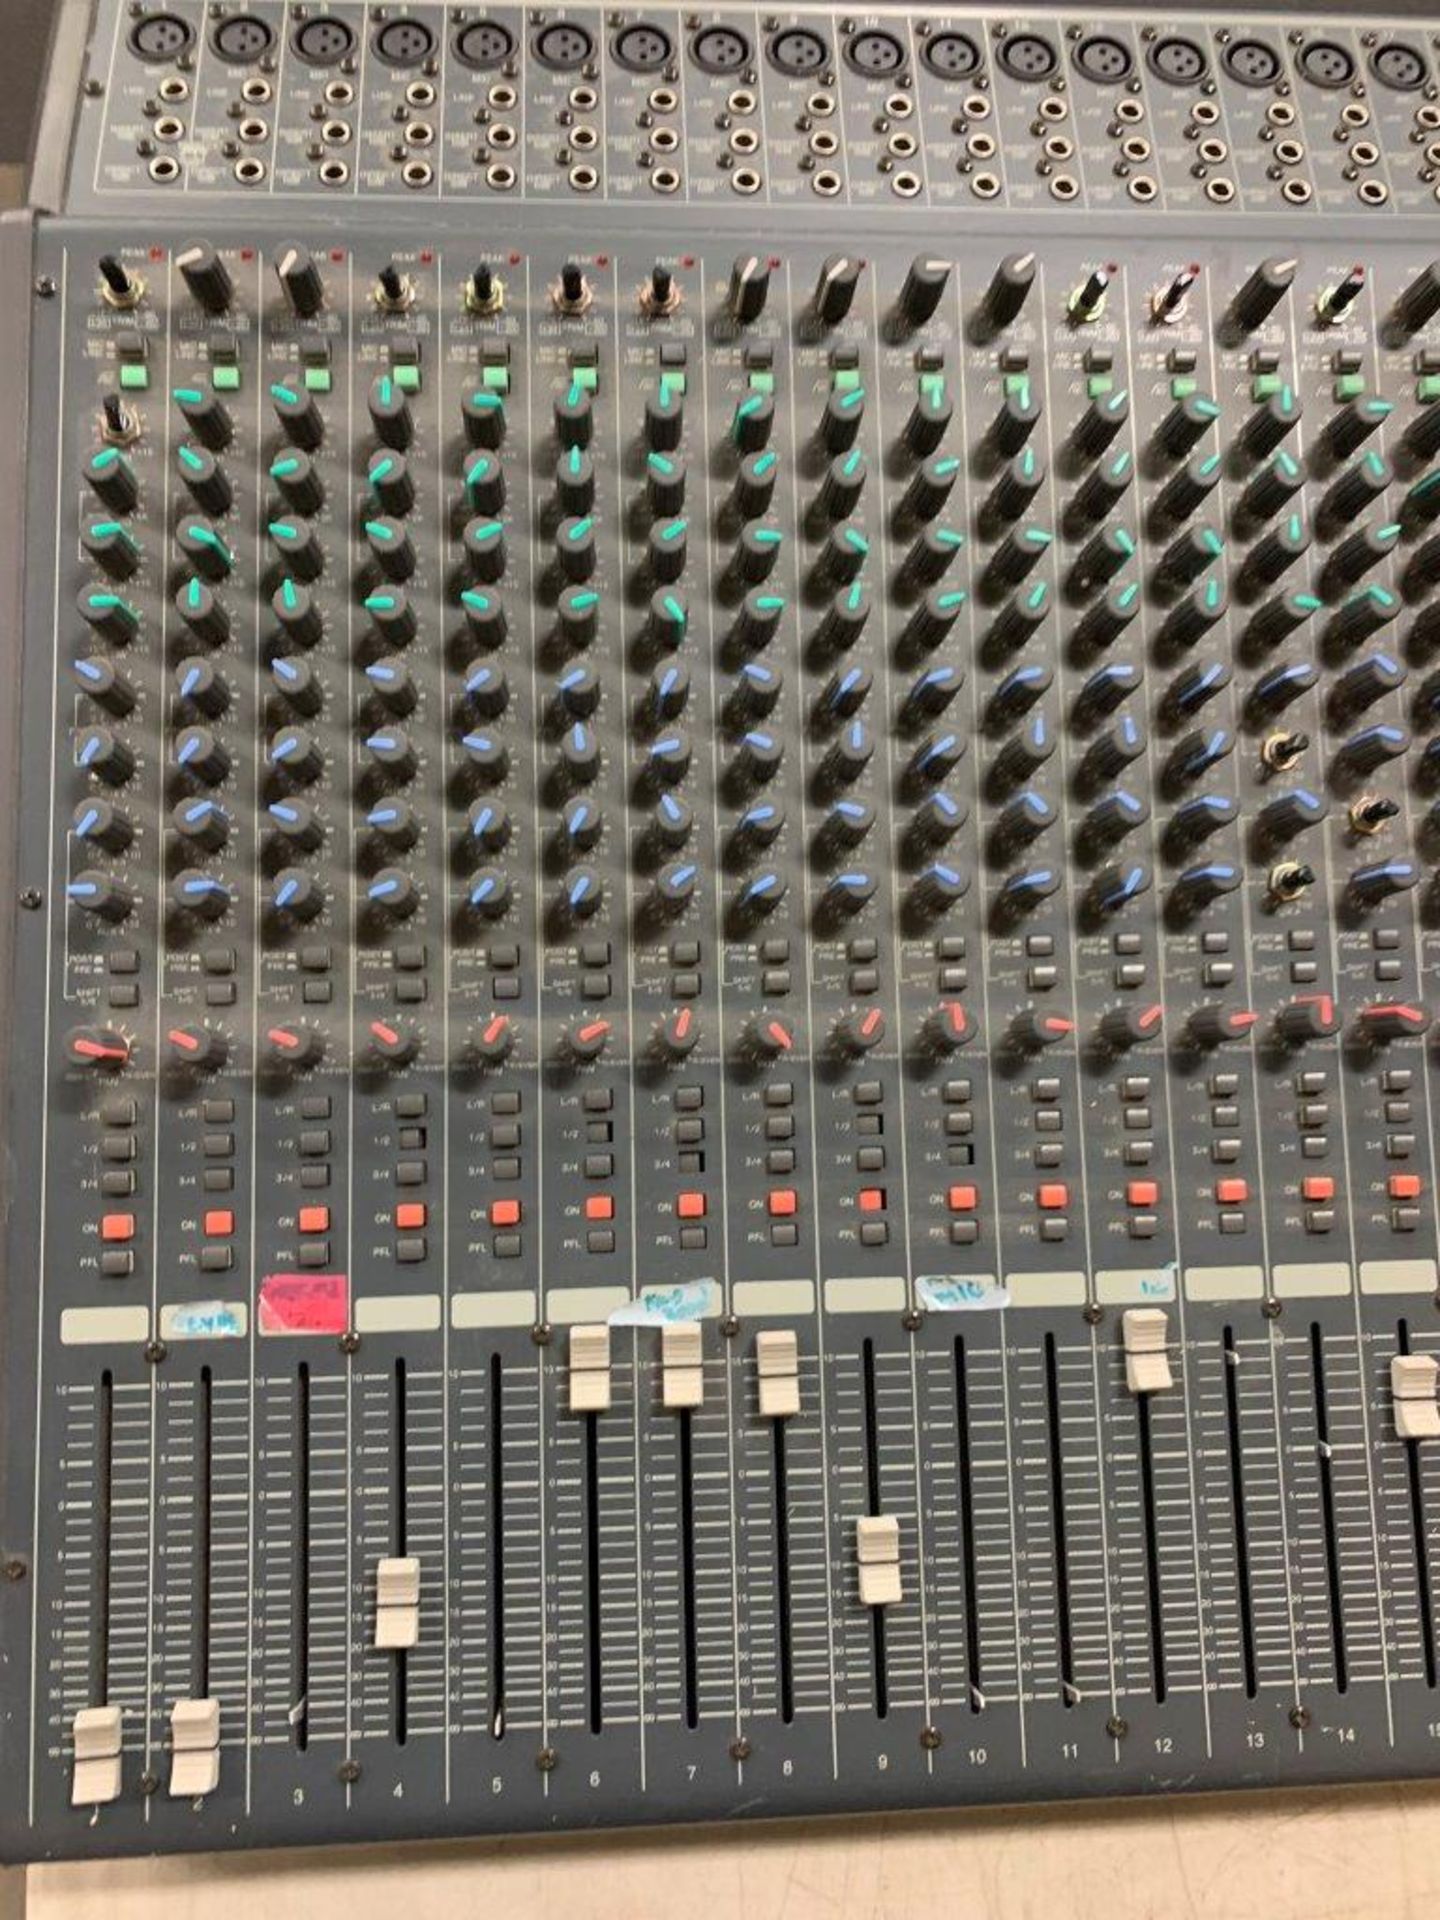 INTER M CMX -2464 AUDIO MIXING CONSOLE SOUND BOARD - Image 2 of 3